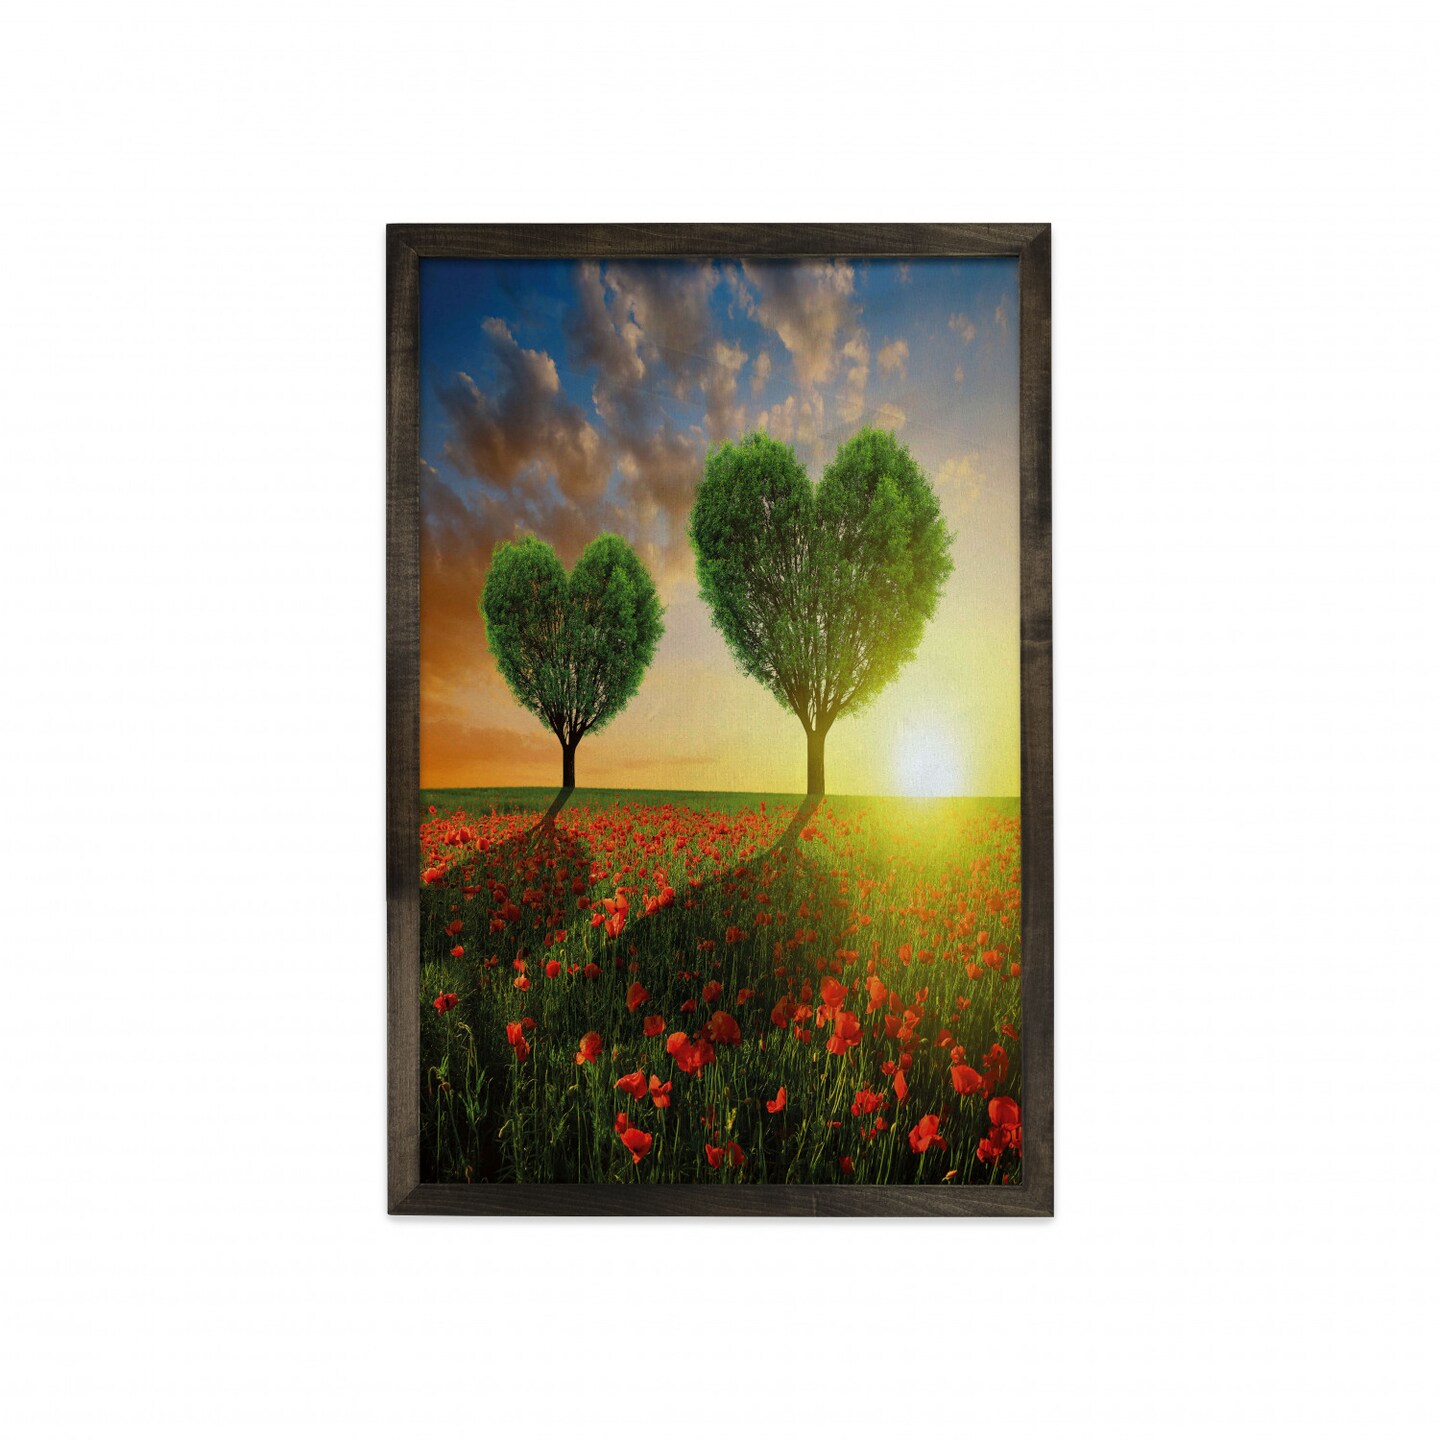 Ambesonne Valentine&#x27;s Day Framed Wall Art, Poppy Field Heart Shaped Trees Sunset Cloudy Sky Rural Romantic Meadow, Fabric Poster with Carbonized Tone Wood Frame Home Decor, 23&#x22; x 35&#x22;, Green Red Blue